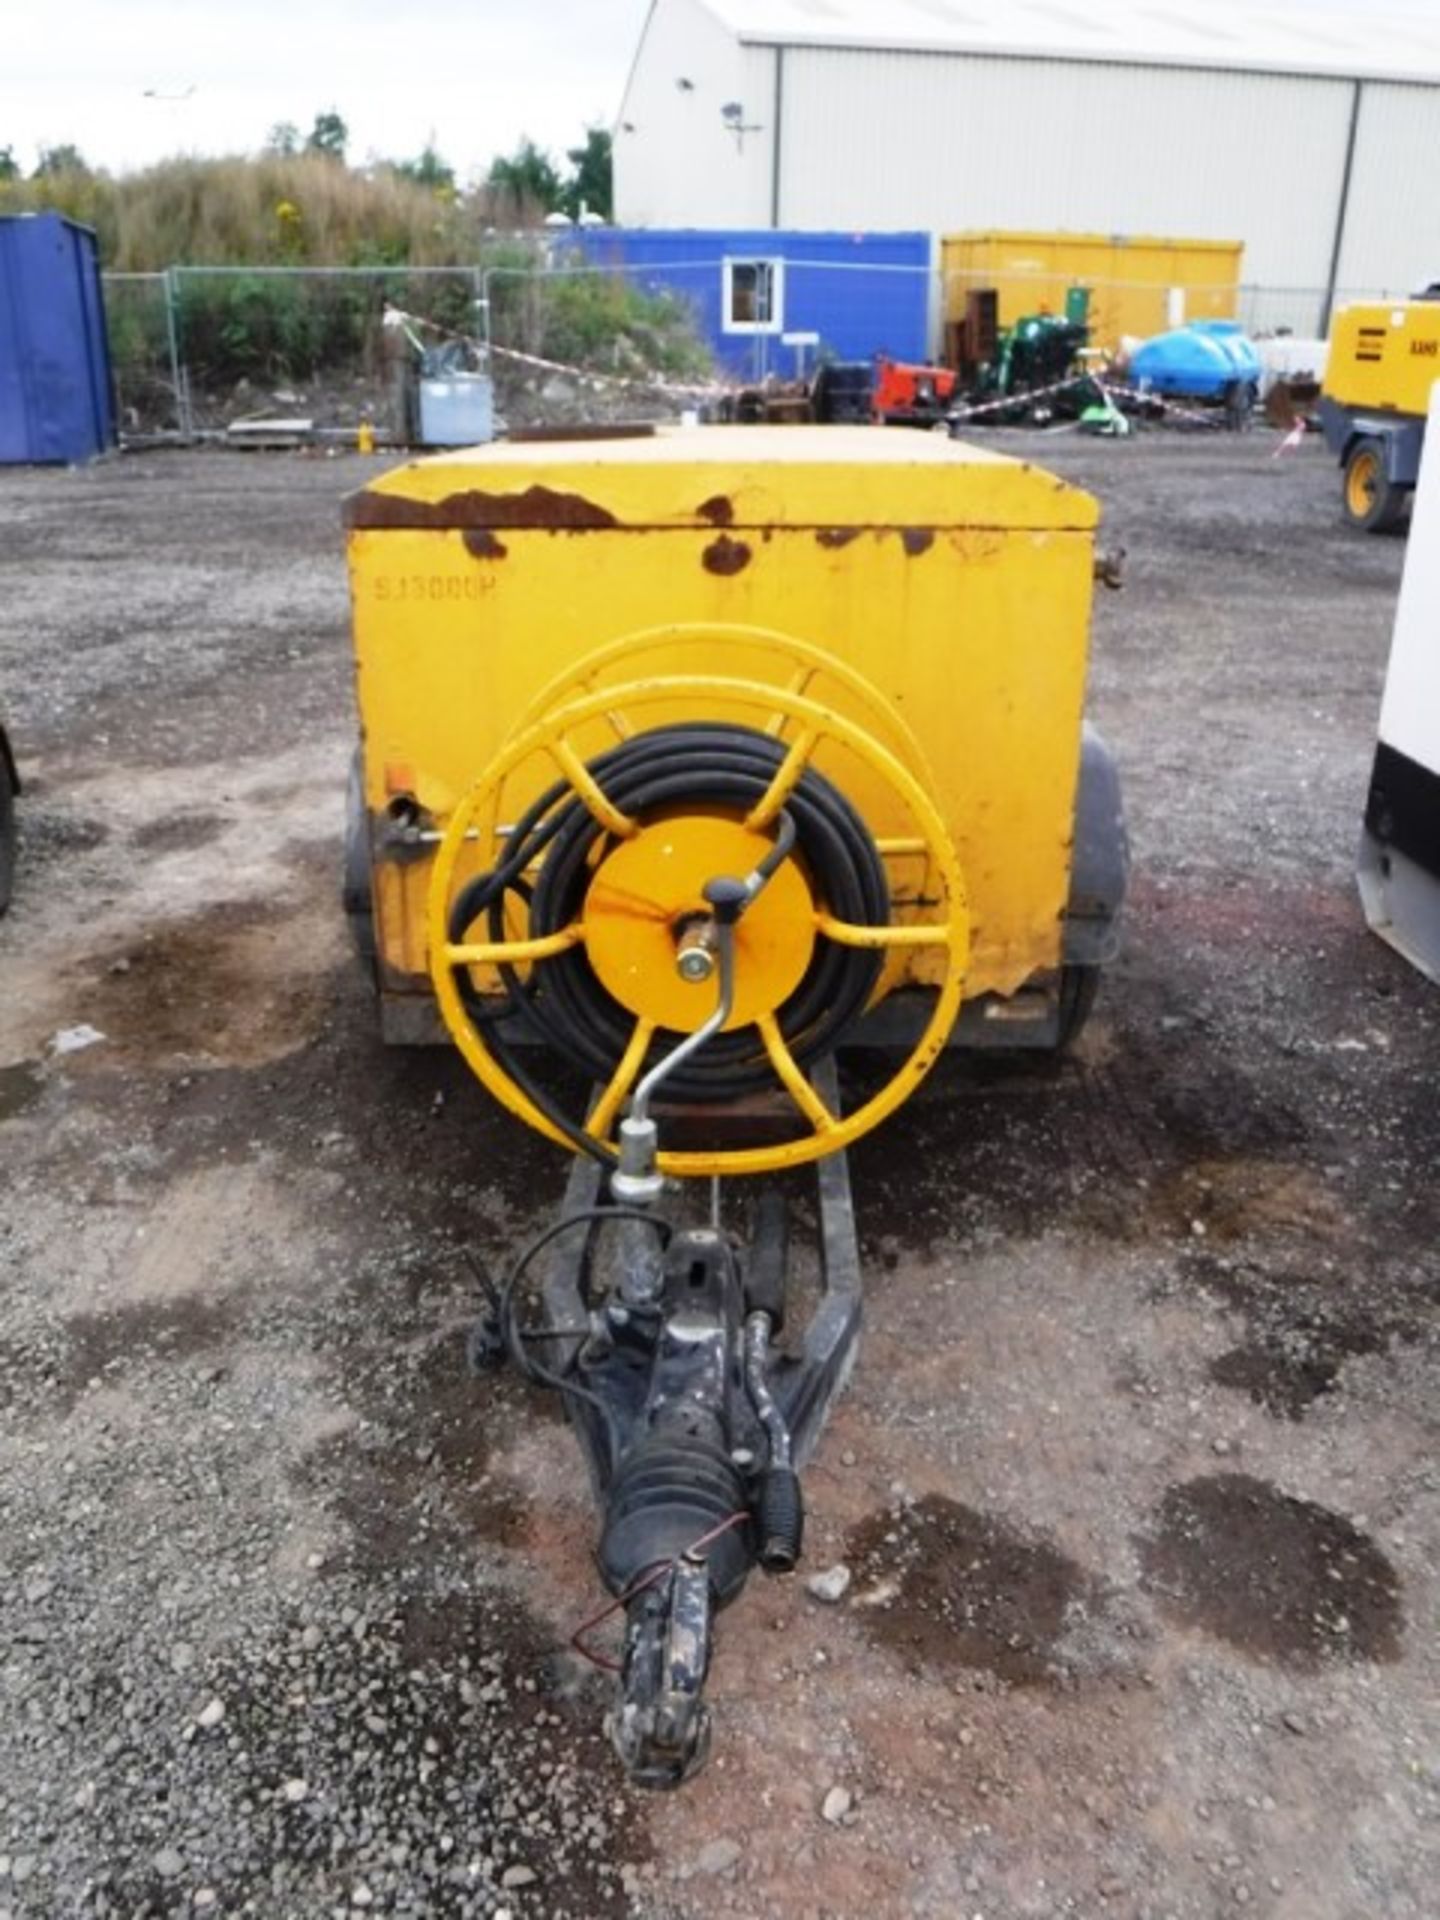 TW FAST TOW HOT & COLD WATER POWER WASHER UNIT. UNIT NO SJ300H